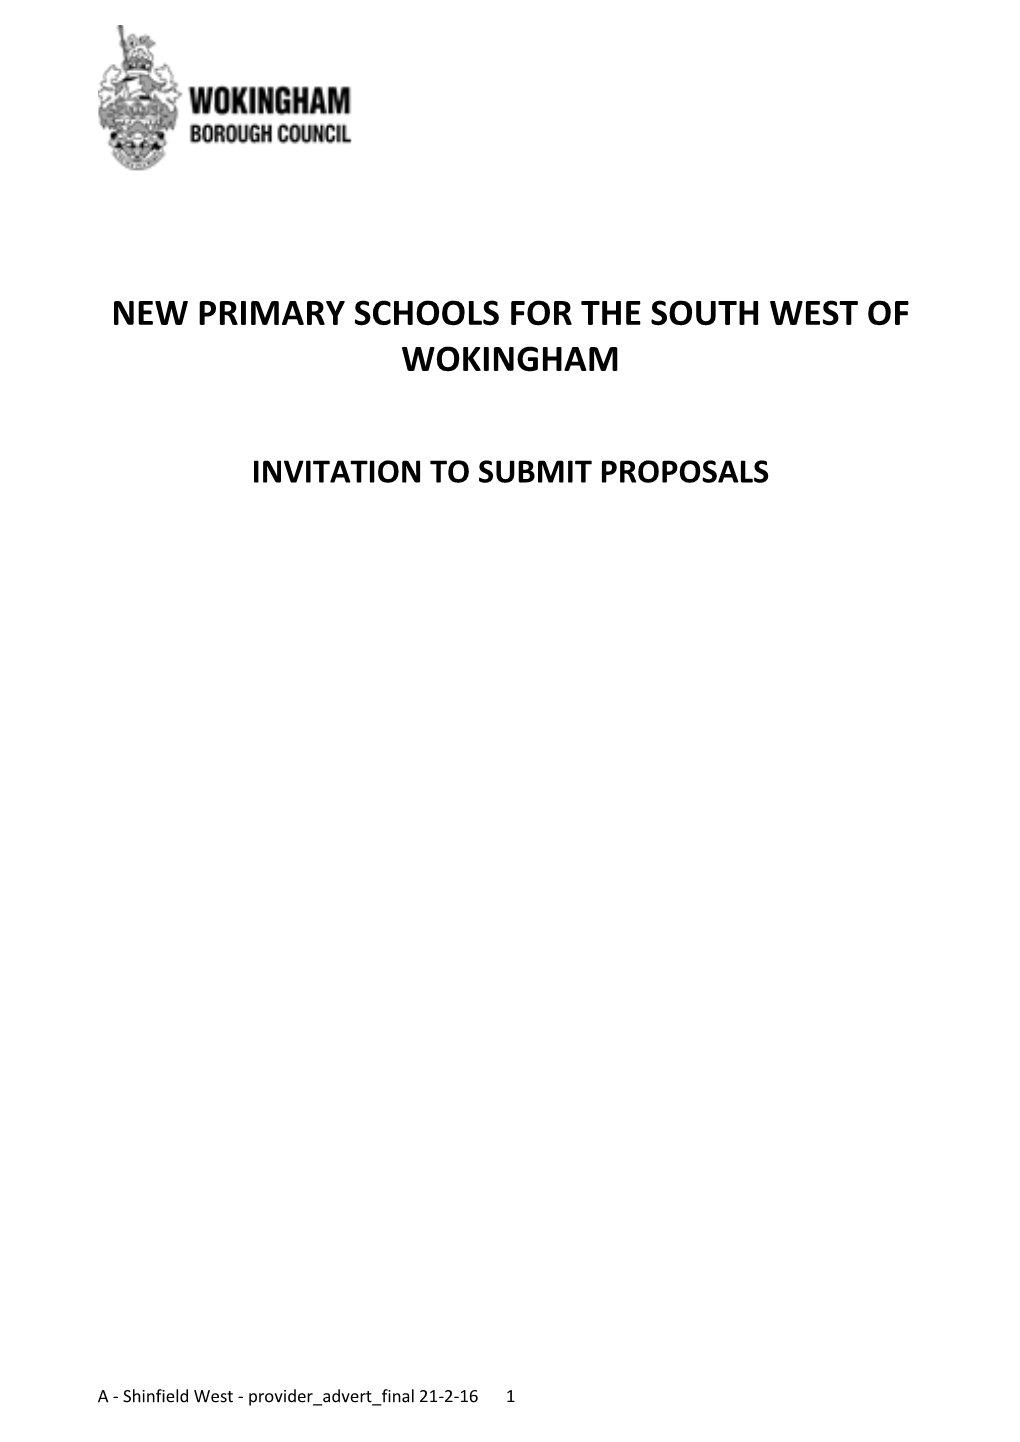 New Primary Schools for the South West of Wokingham